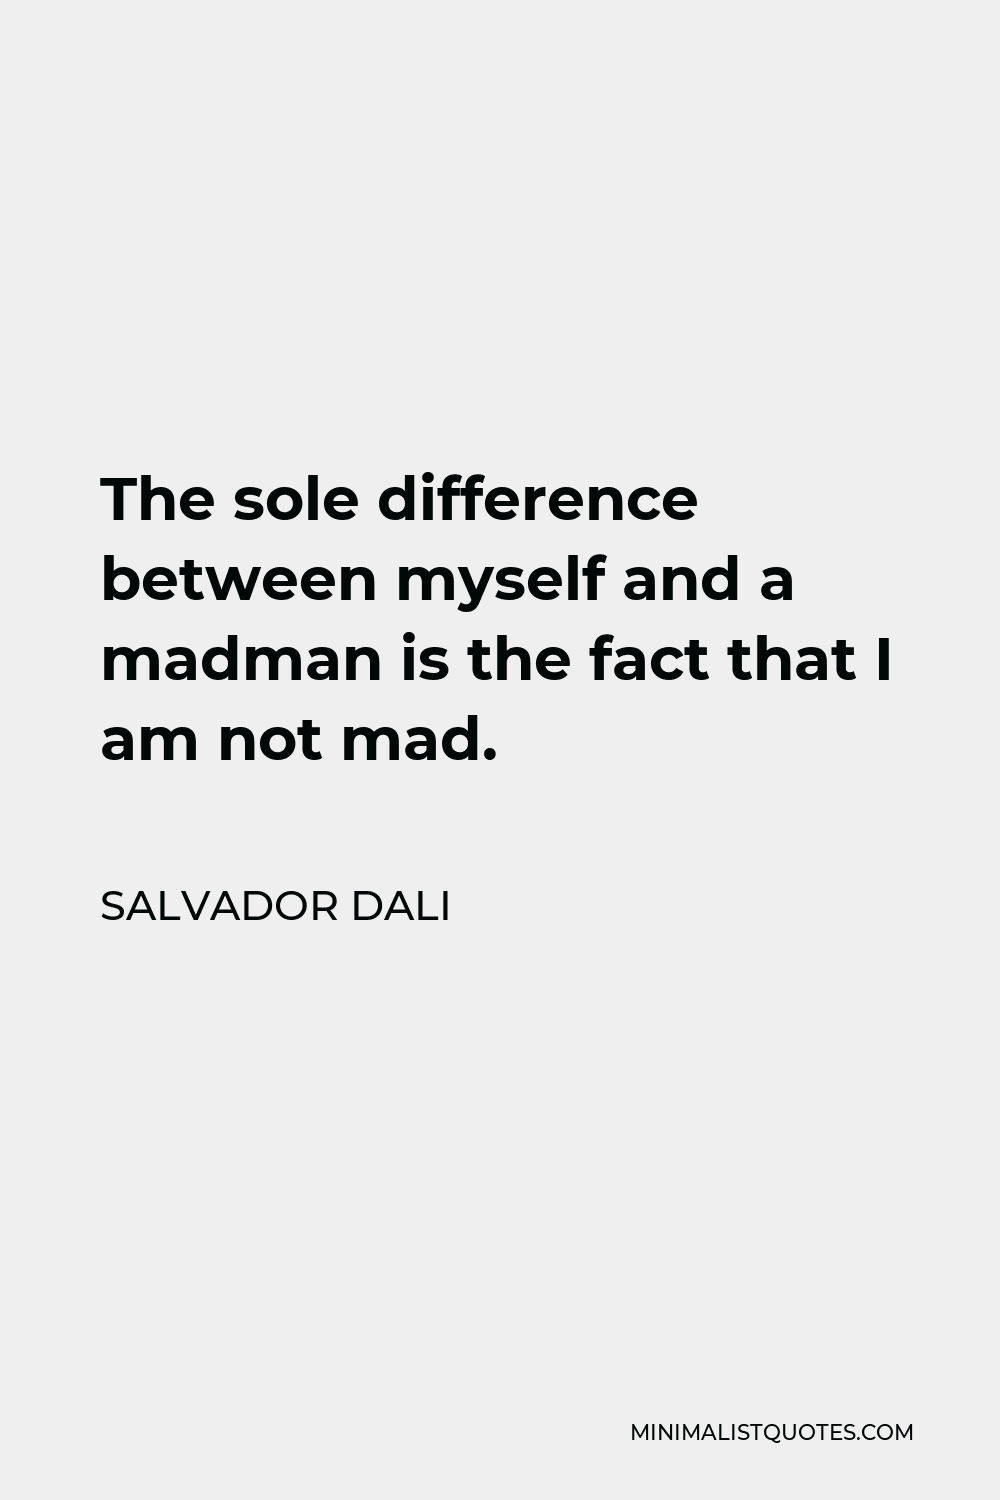 Salvador Dali Quote - The sole difference between myself and a madman is the fact that I am not mad.